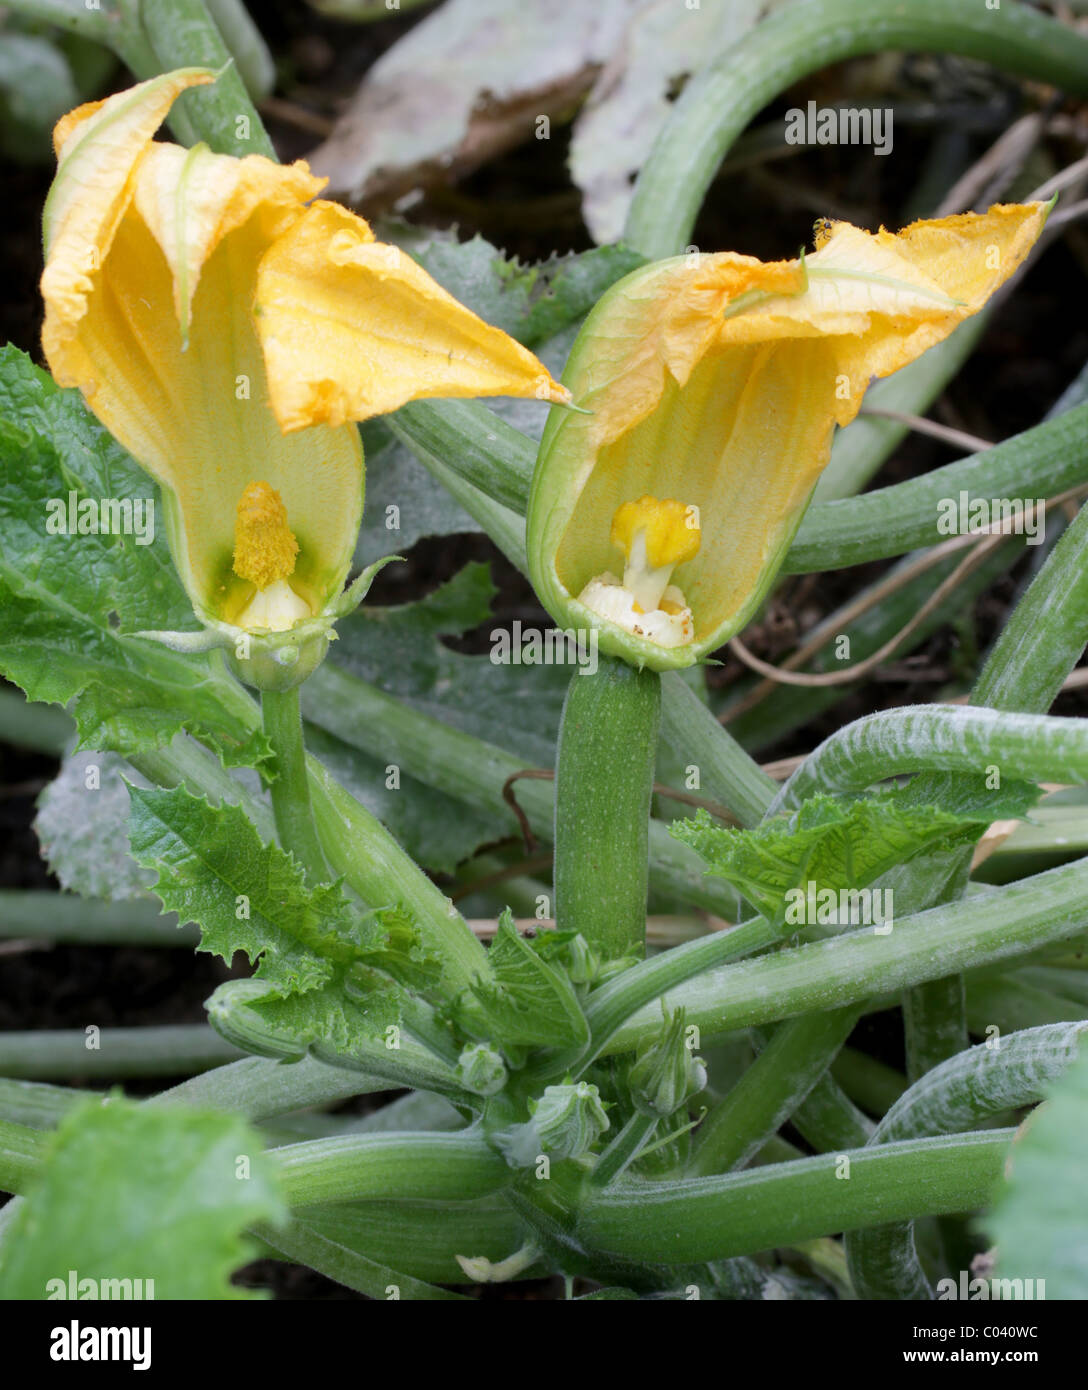 Male (left) and female (right) zucchini flowers. Stock Photo